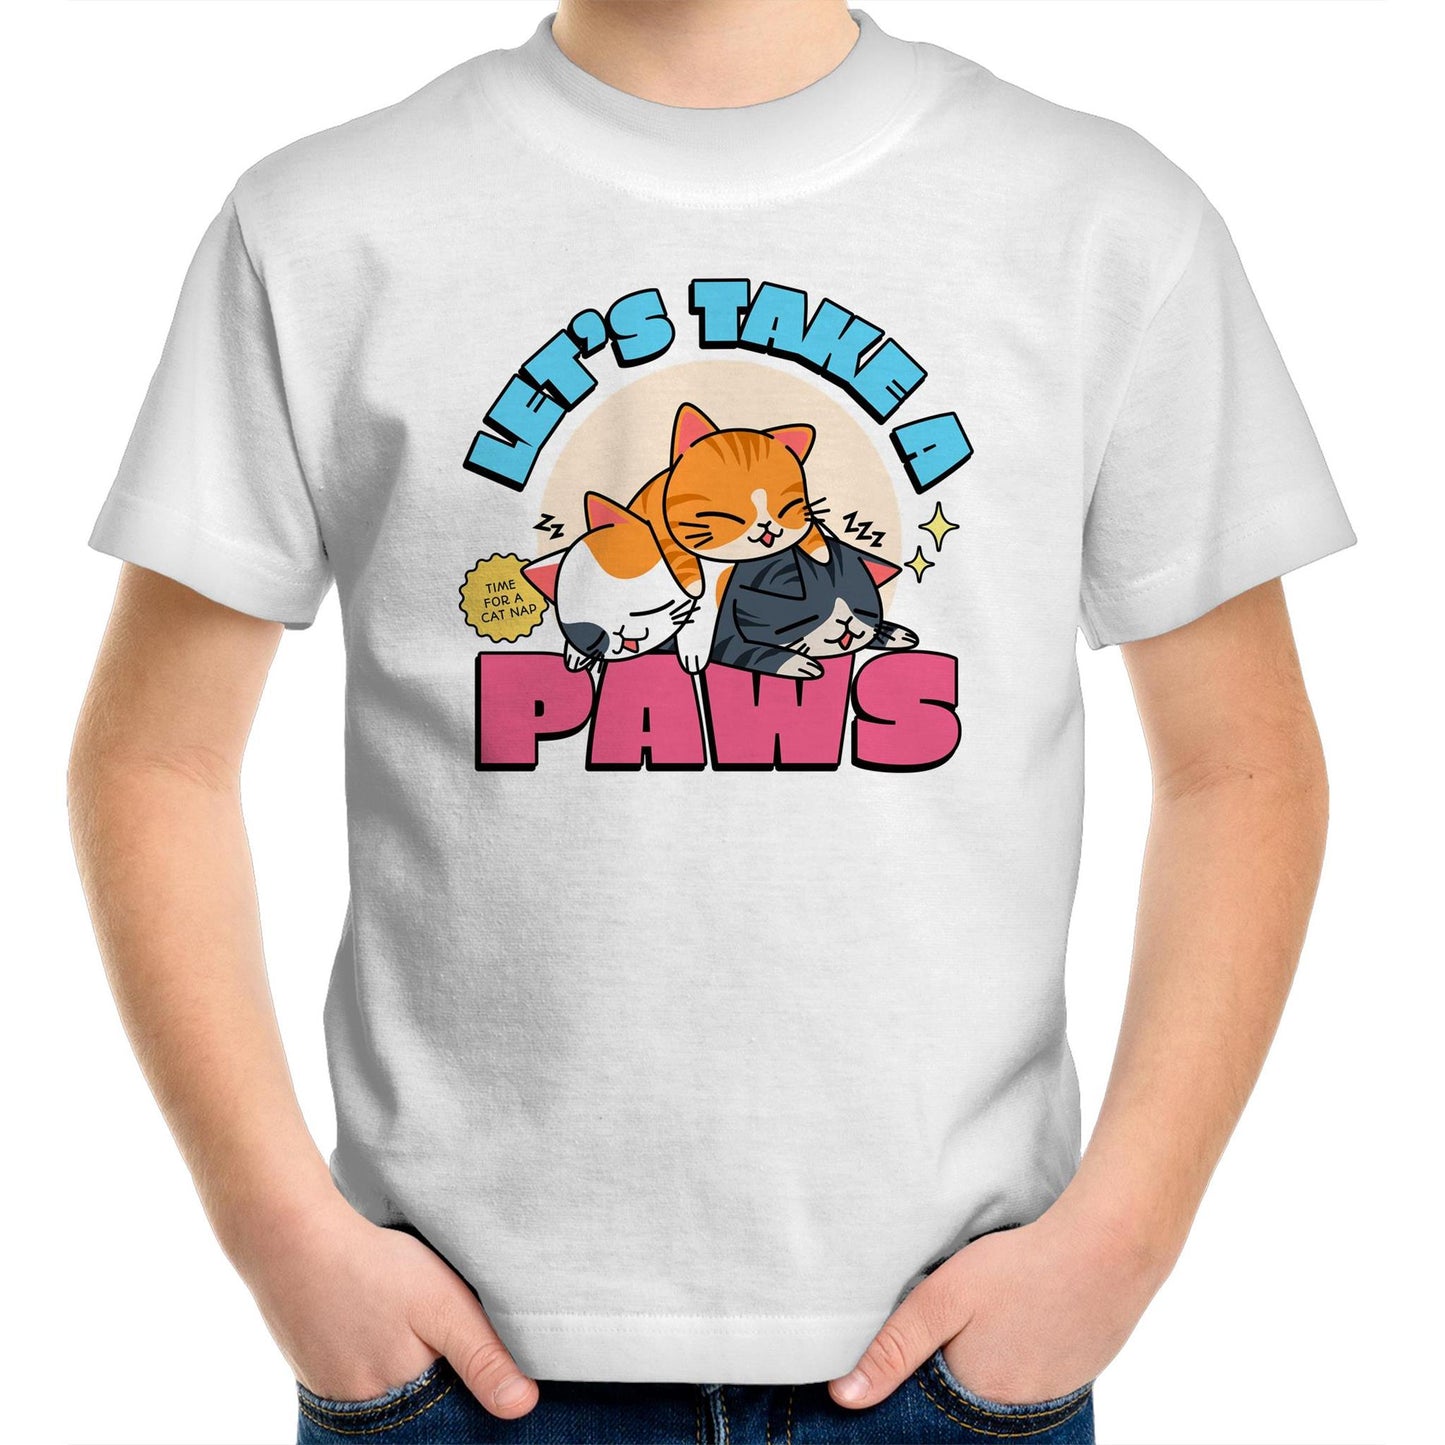 Let's Take A Pause, Time For A Cat Nap - Kids Youth T-Shirt White Kids Youth T-shirt animal